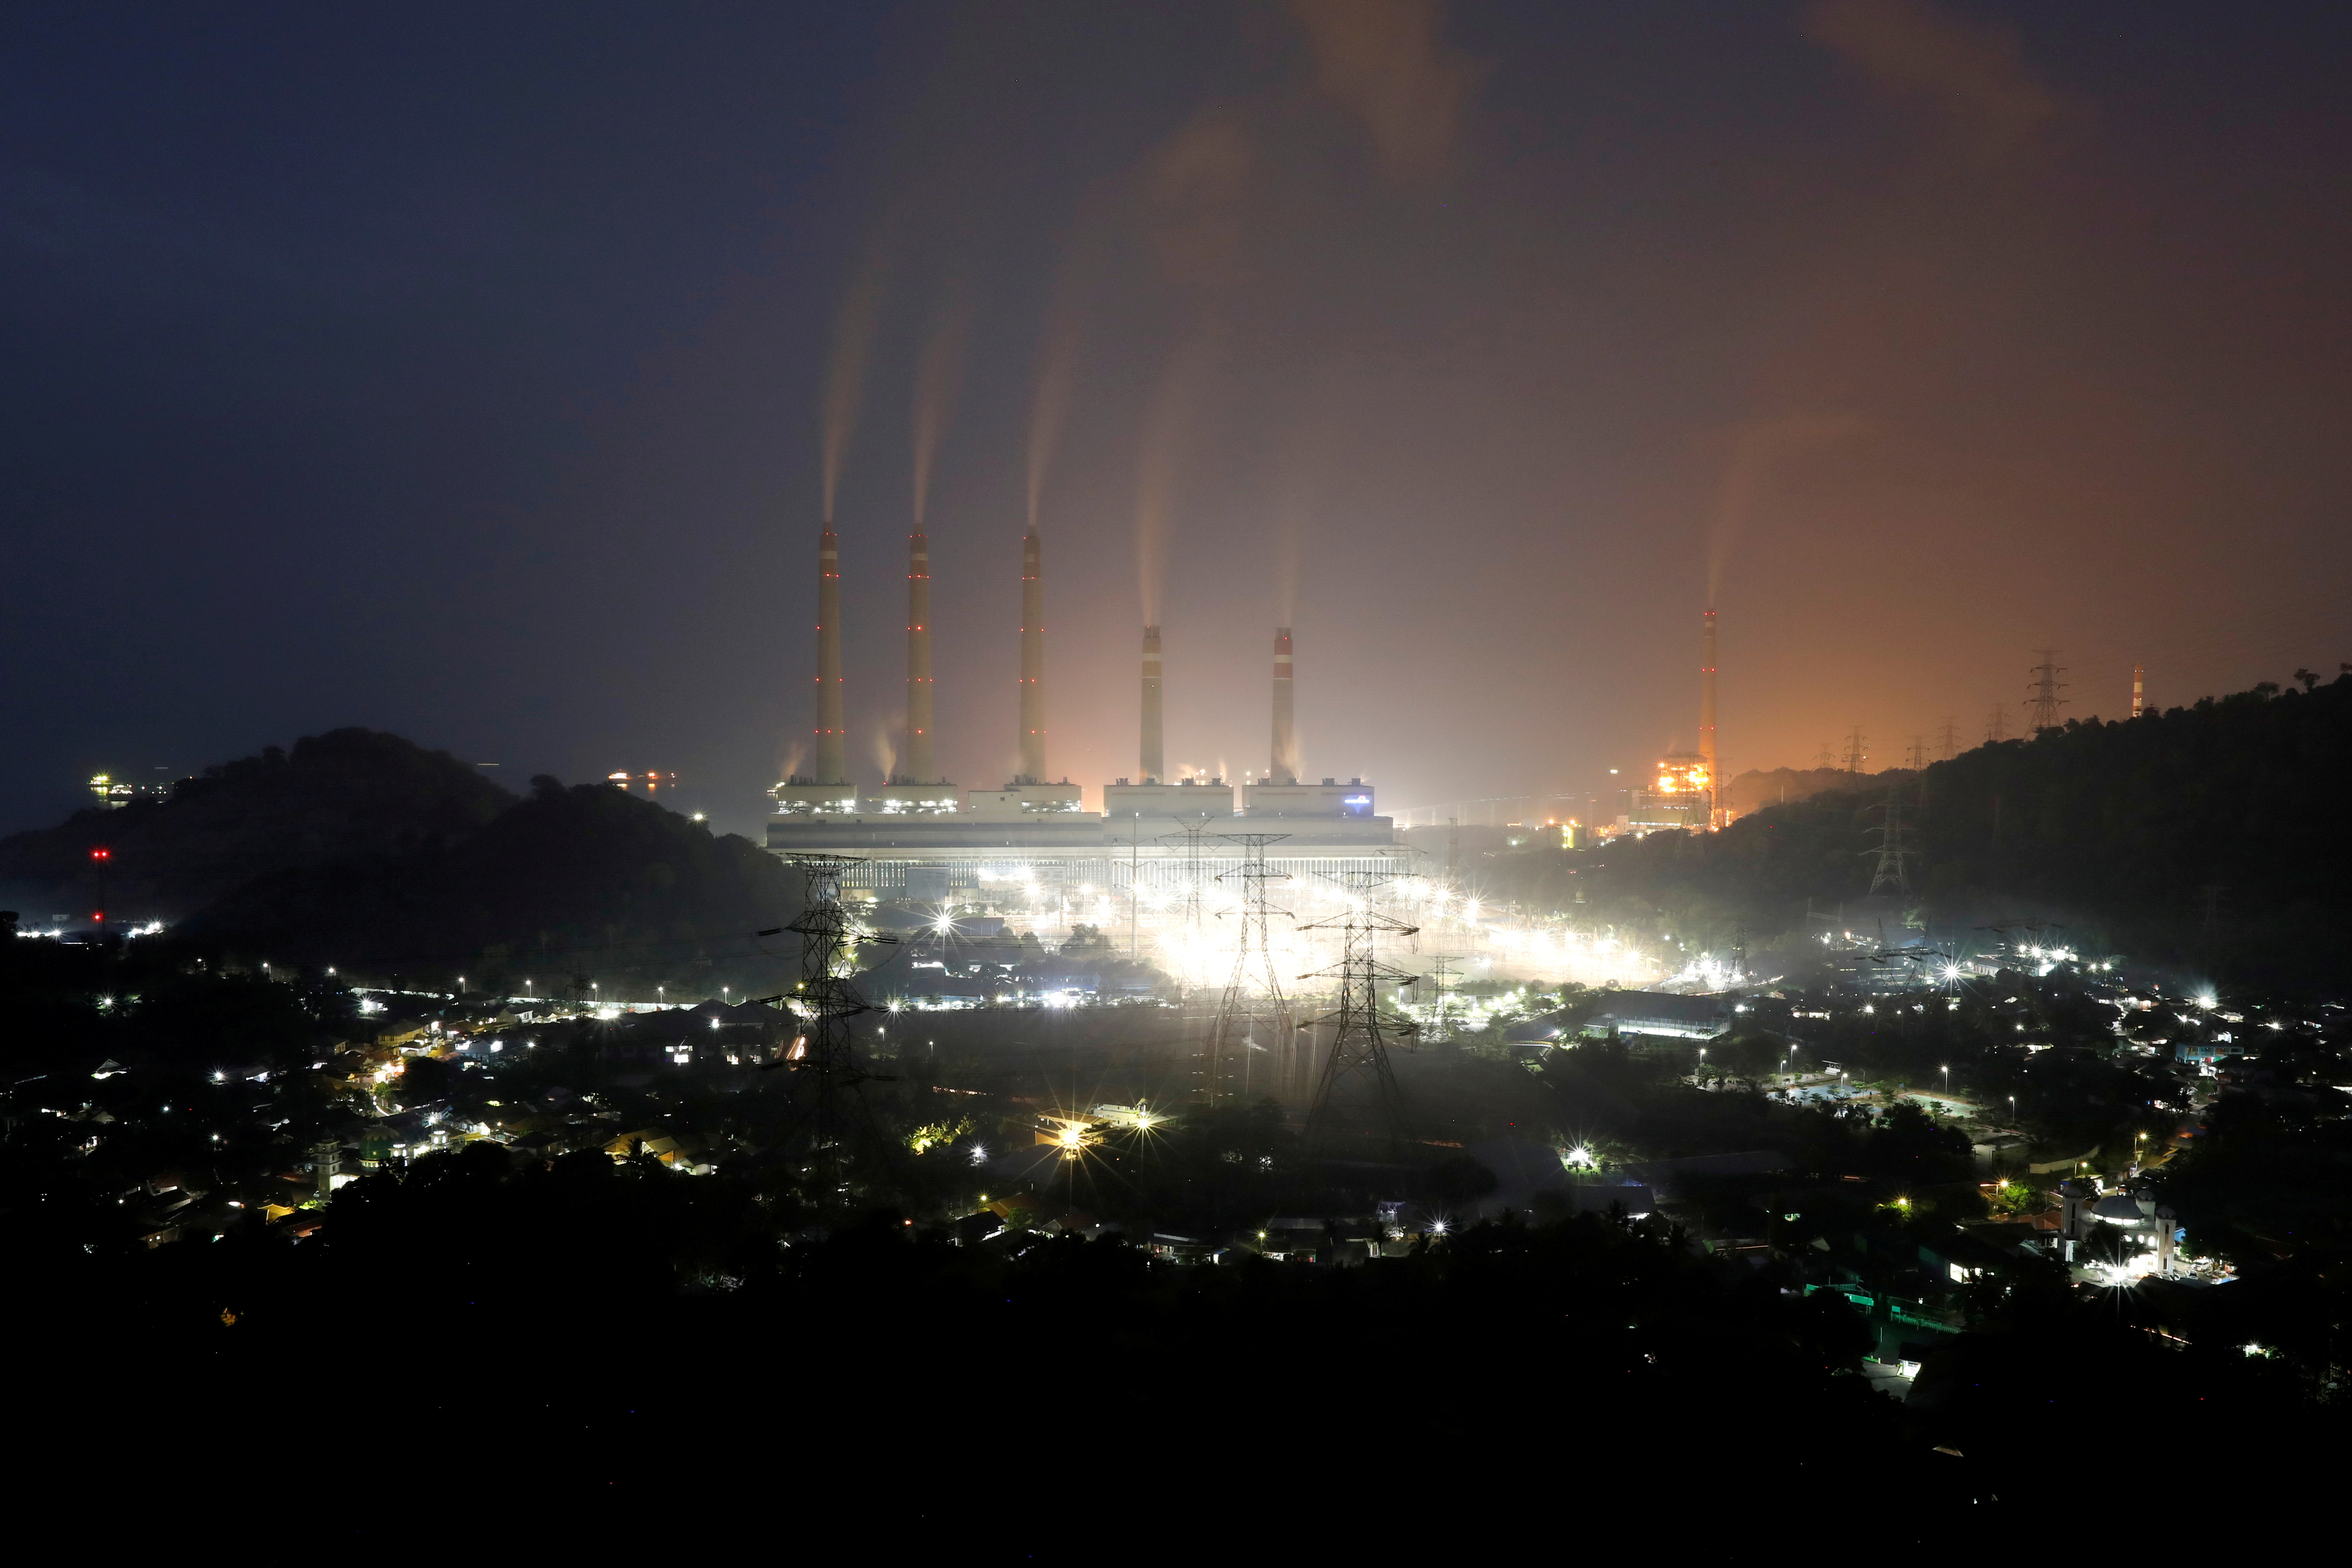 Smoke and steam billows from a coal-fired power plant owned by Indonesia Power in Suralaya, Banten province, Indonesia, July 10, 2020. REUTERS/Willy Kurniawan/File Photo